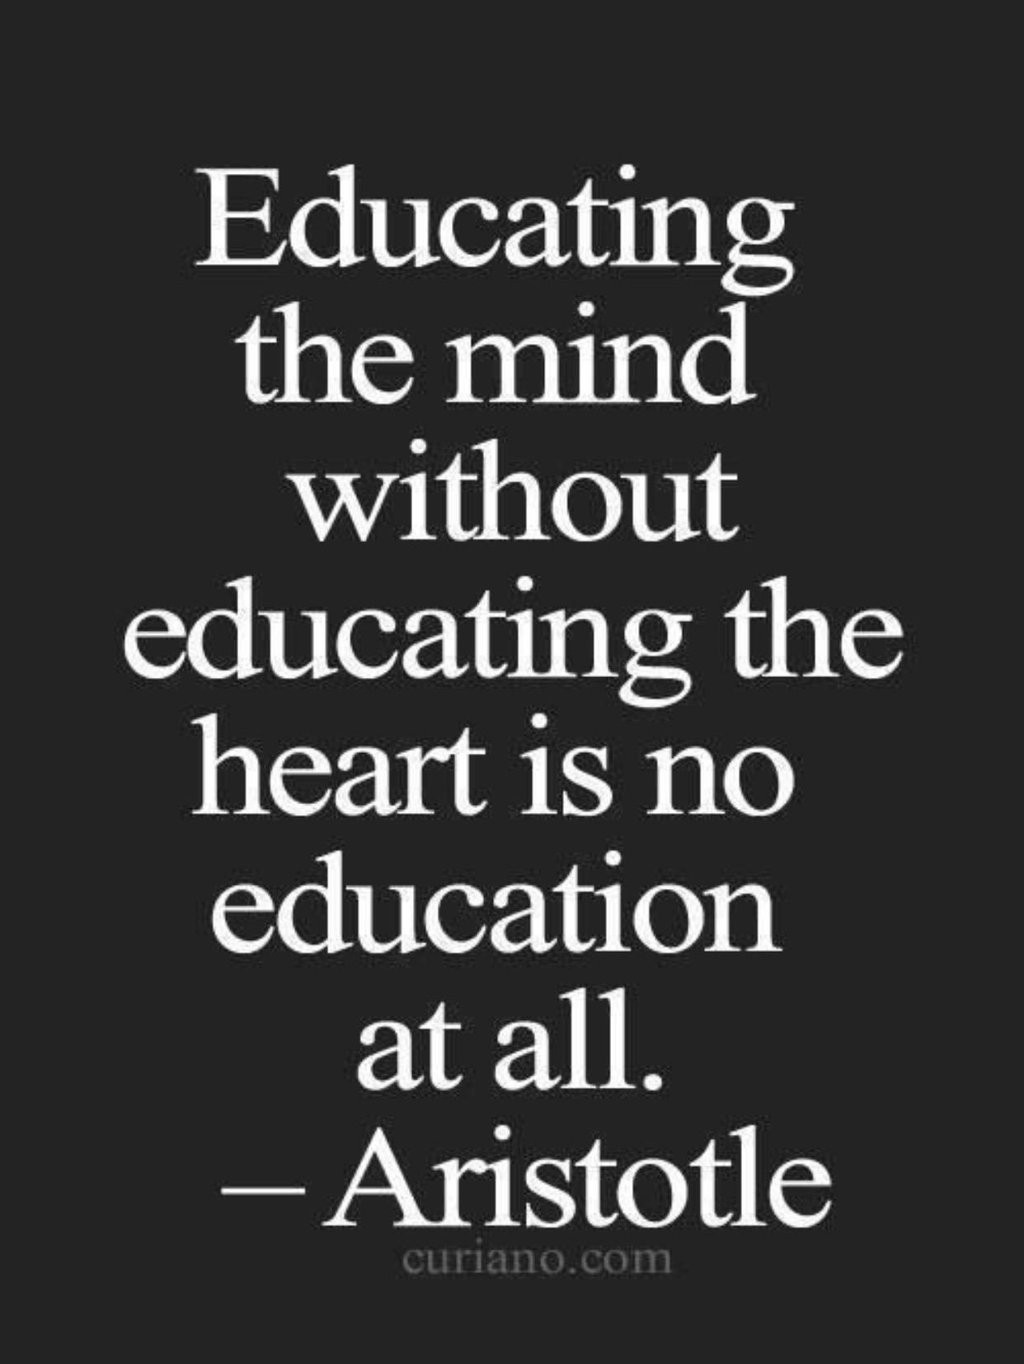 Aristotle Education Quotes
 Educating the mind without educating the heart is no